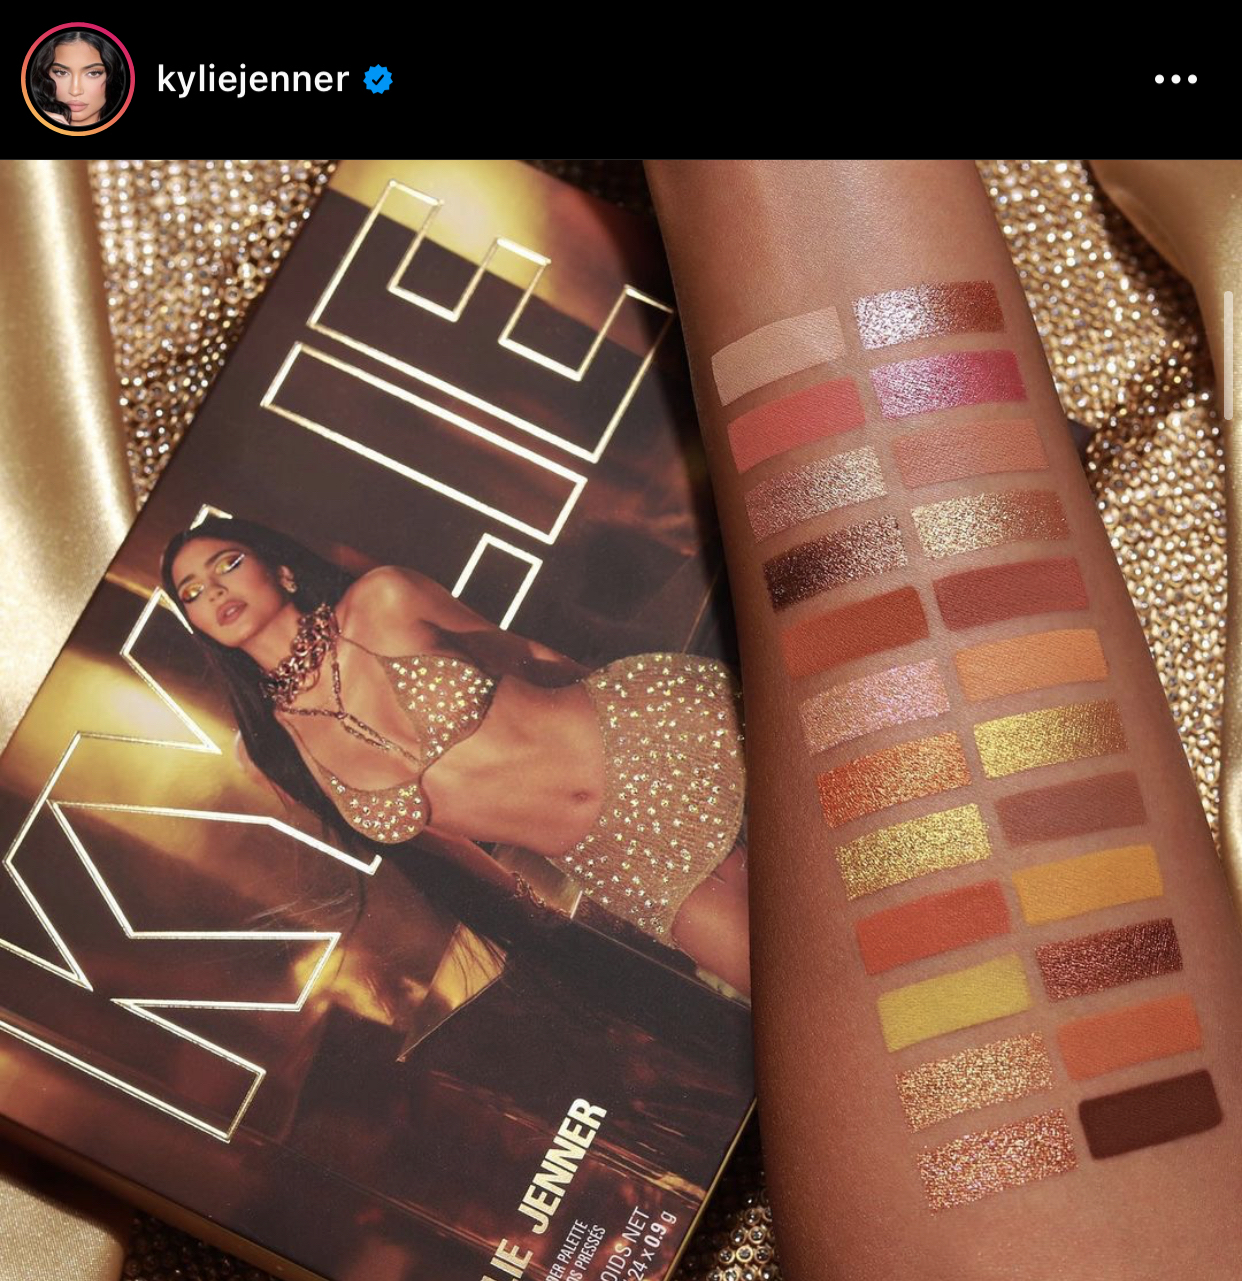 Kylie Jenner Eyeshade Swatches Kylie